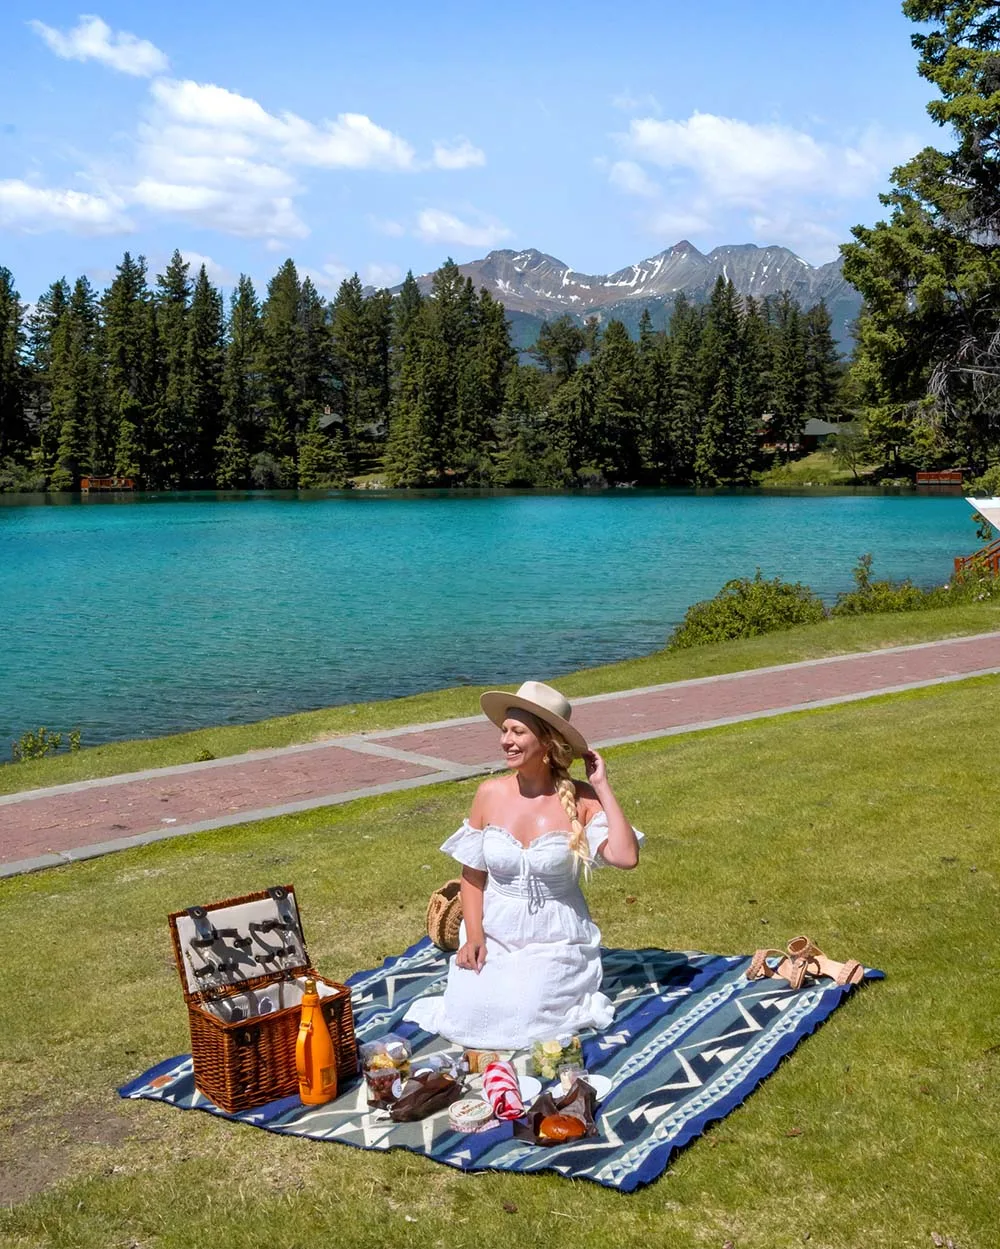 Planning a trip to Jasper National Park soon? Here's a local's guide to some of the best things to do in Jasper. From hikes and trails to adventure sports, family friendly excursions, dining experiences and more. You won't want to miss this guide of the best things to do and places to see in Jasper. Pictured here: Have a champagne picnic in the mountains